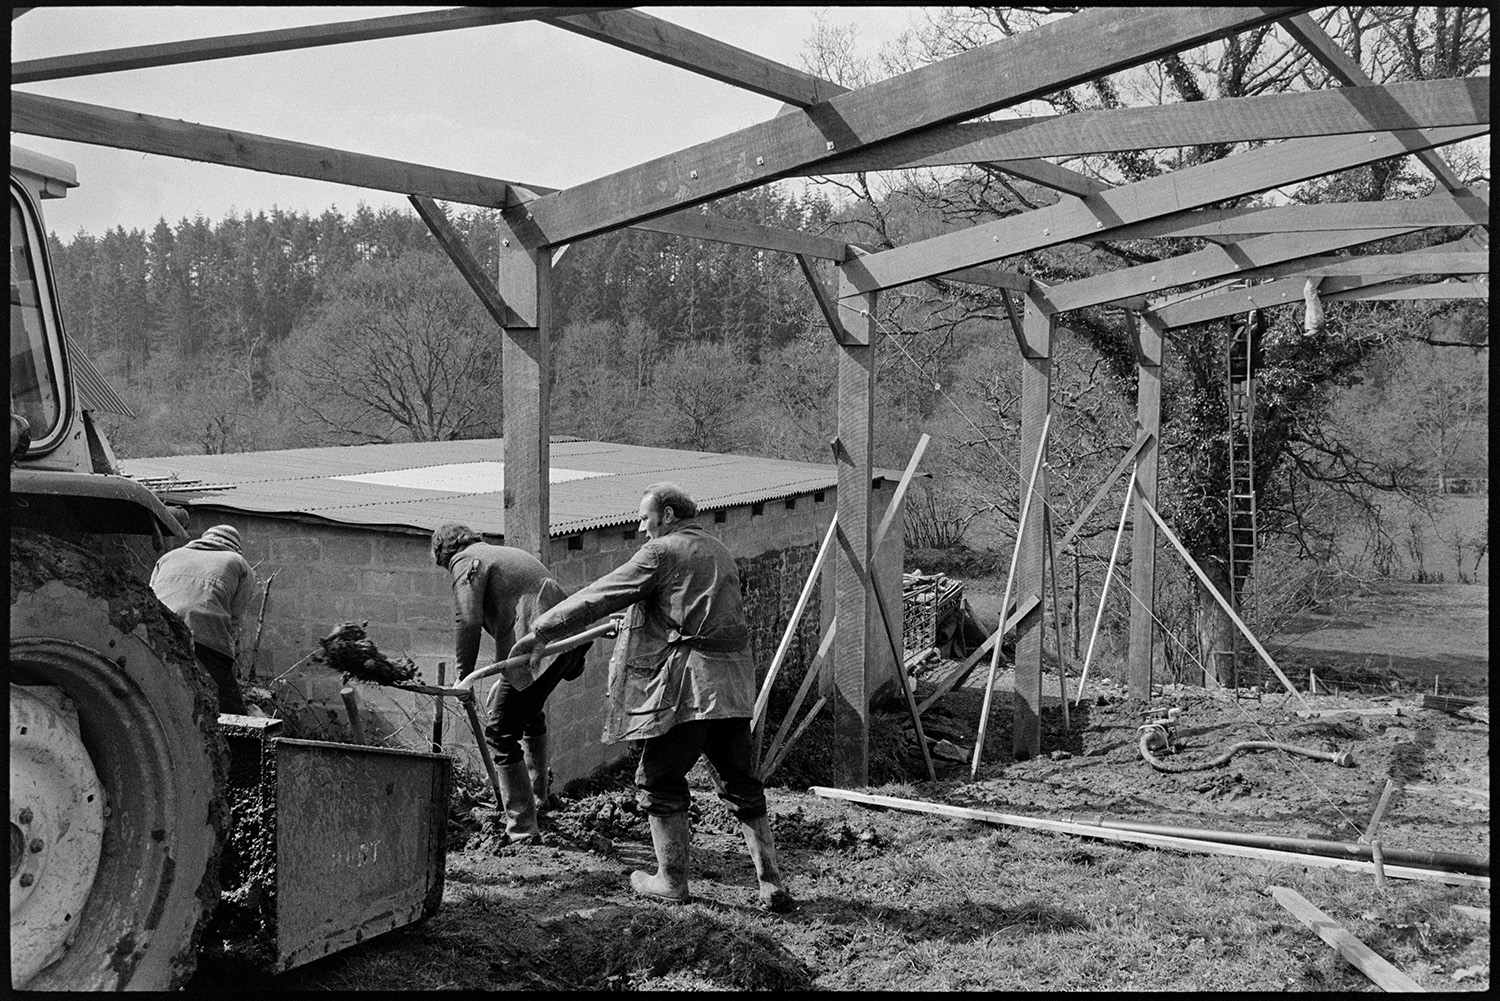 Men building metal and timber framed barn shed. 
[Men building a barn with a timber and metal frame near New Bridge, Dolton. One person is up a ladder working on the Frame while the other men are shovelling earth into a link box attached to a tractor. Another barn with a corrugated iron roof can be seen in the background.]